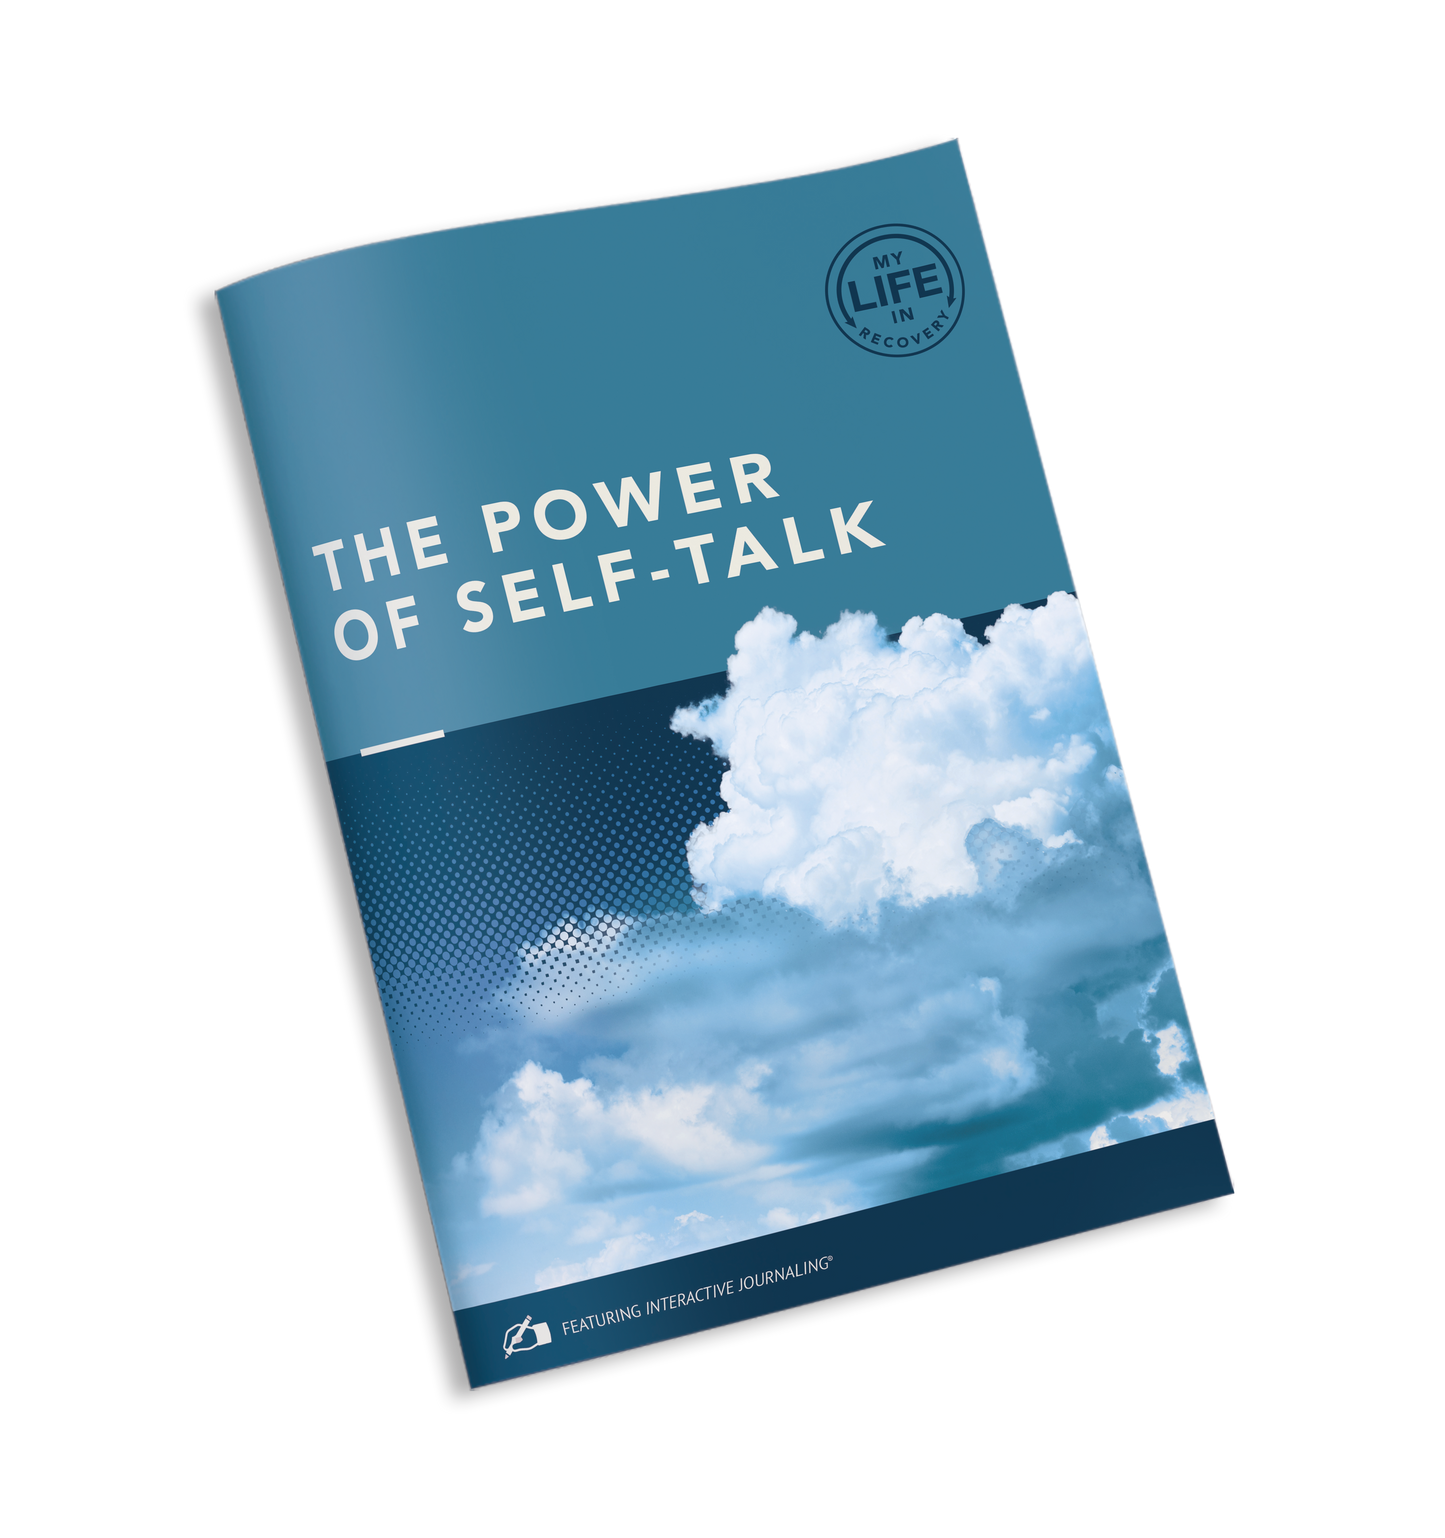 My Life in Recovery - The Power of Self-talk